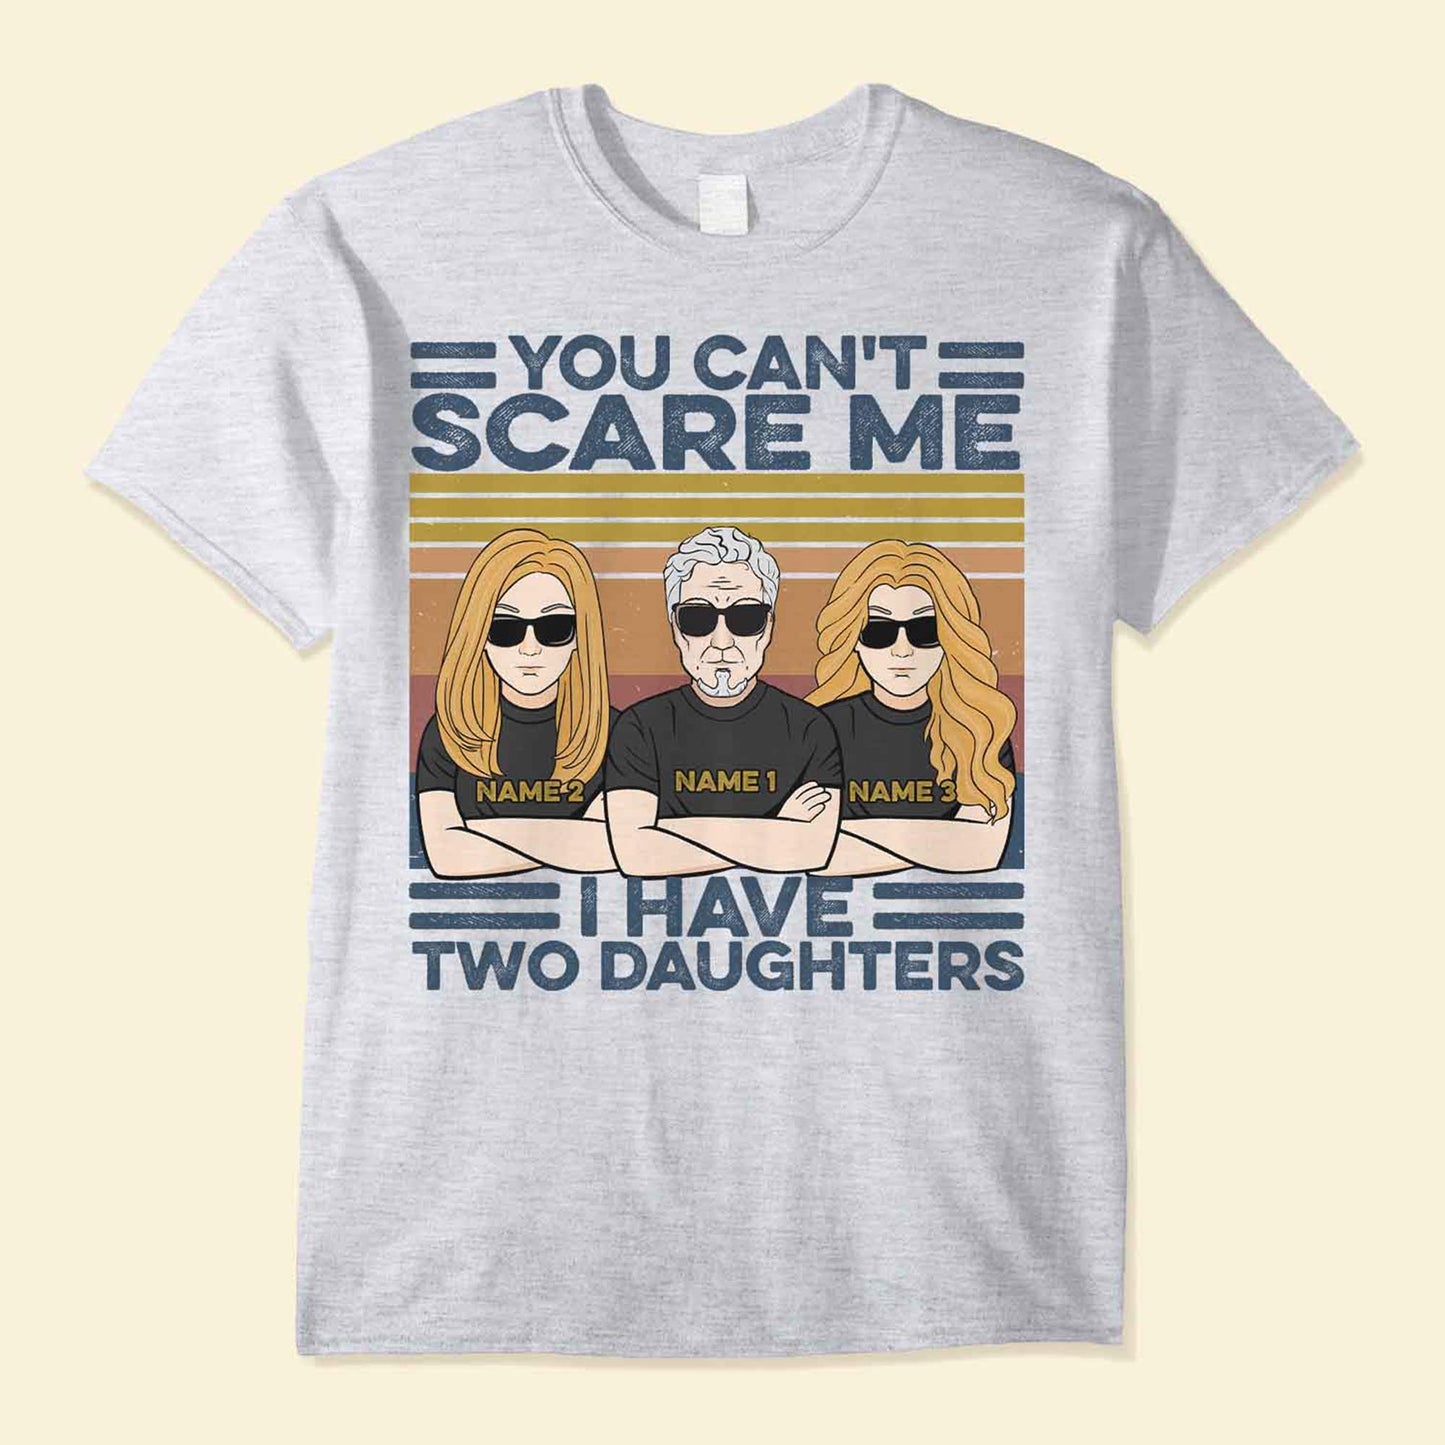 You Can't Scare Me I Have Daughters - Personalized Shirt - Father And Daughter Illustration